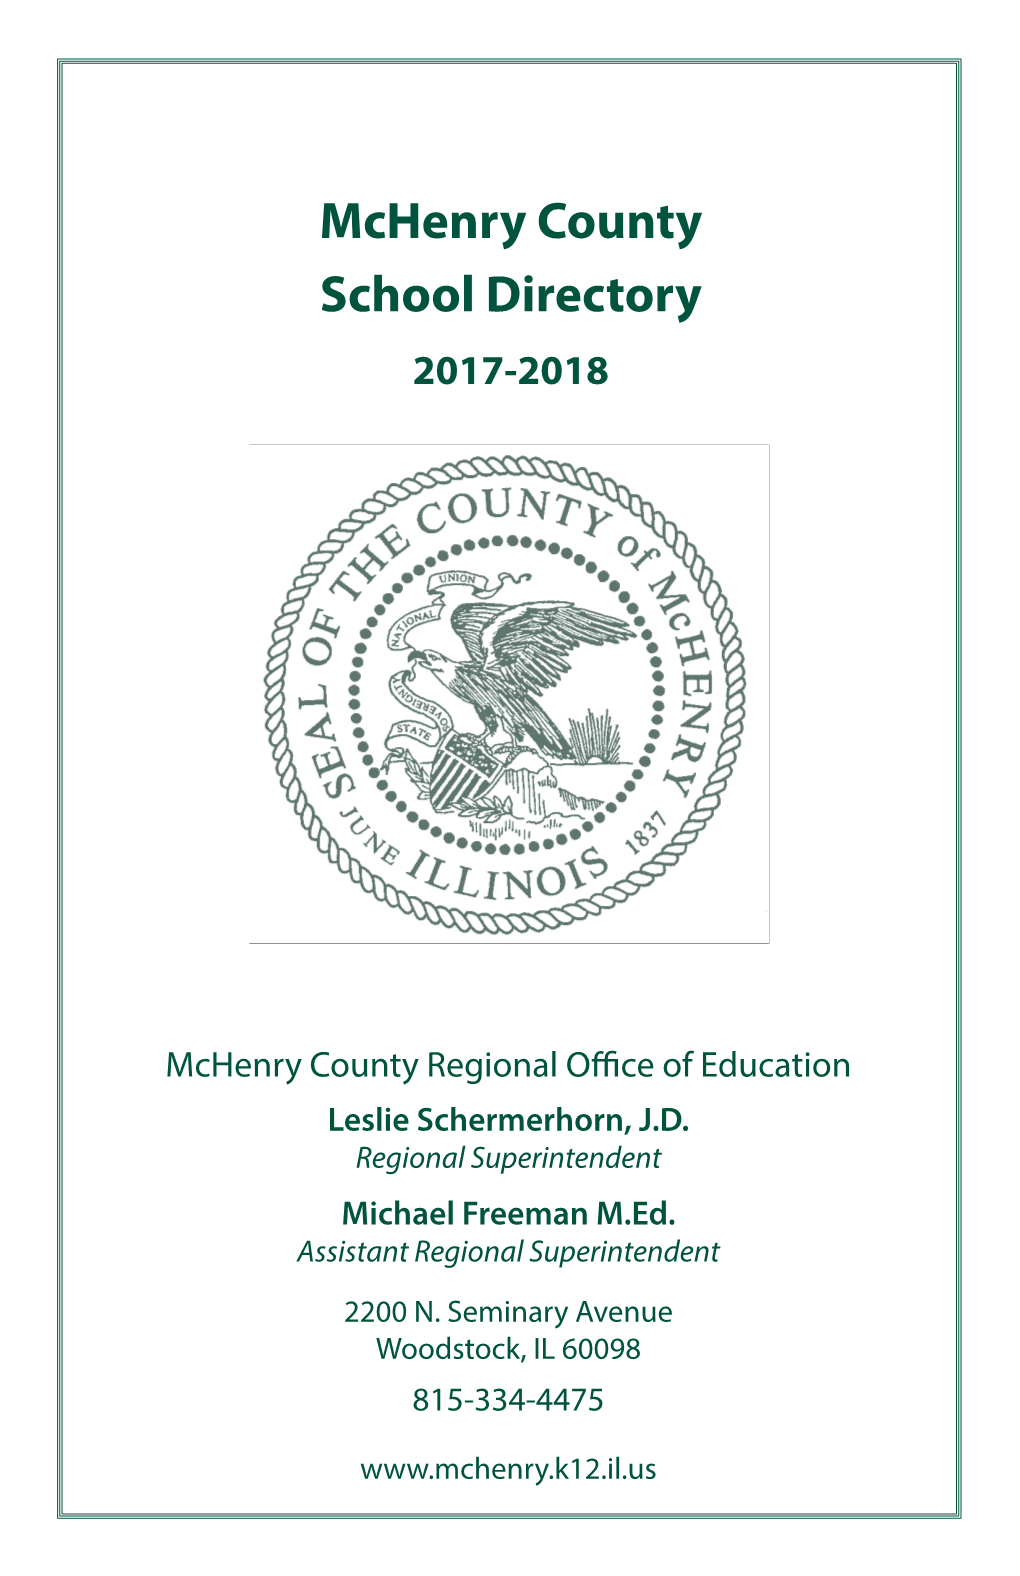 Mchenry County School Directory 2017-2018